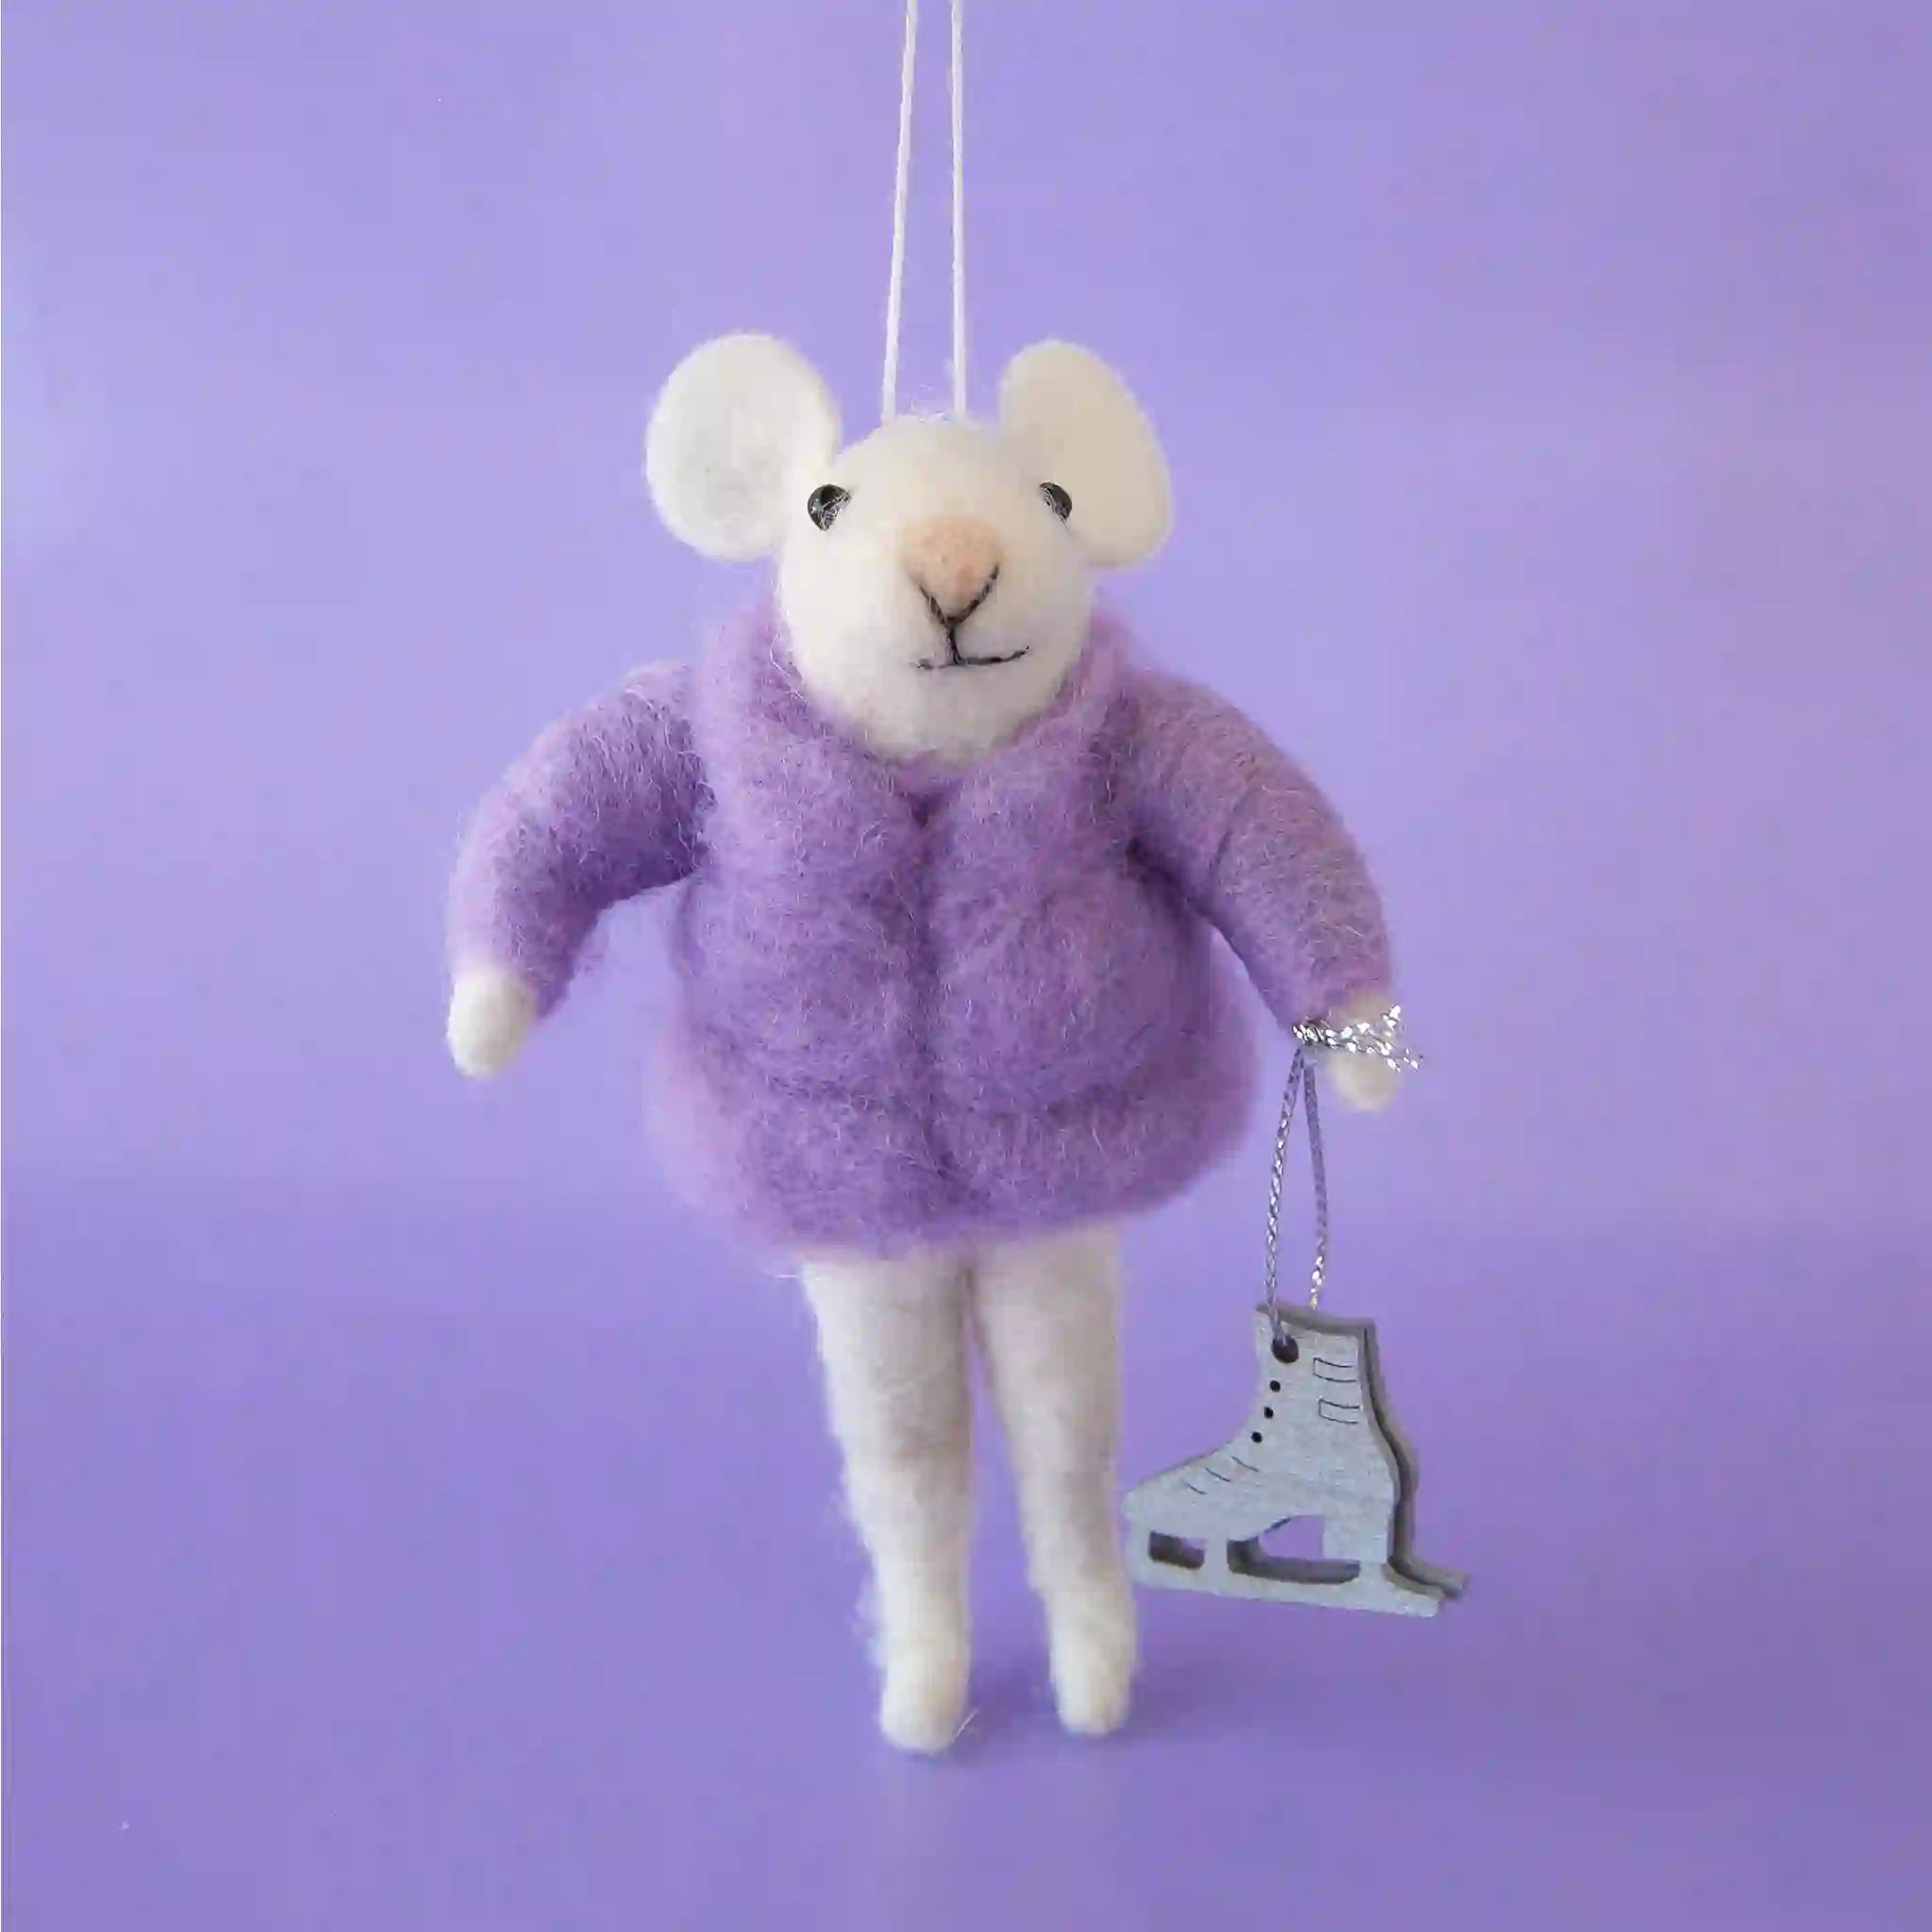 On a purple background is a white felt mouse ornament wearing a  purple puffy jacket and holding ice skates. 